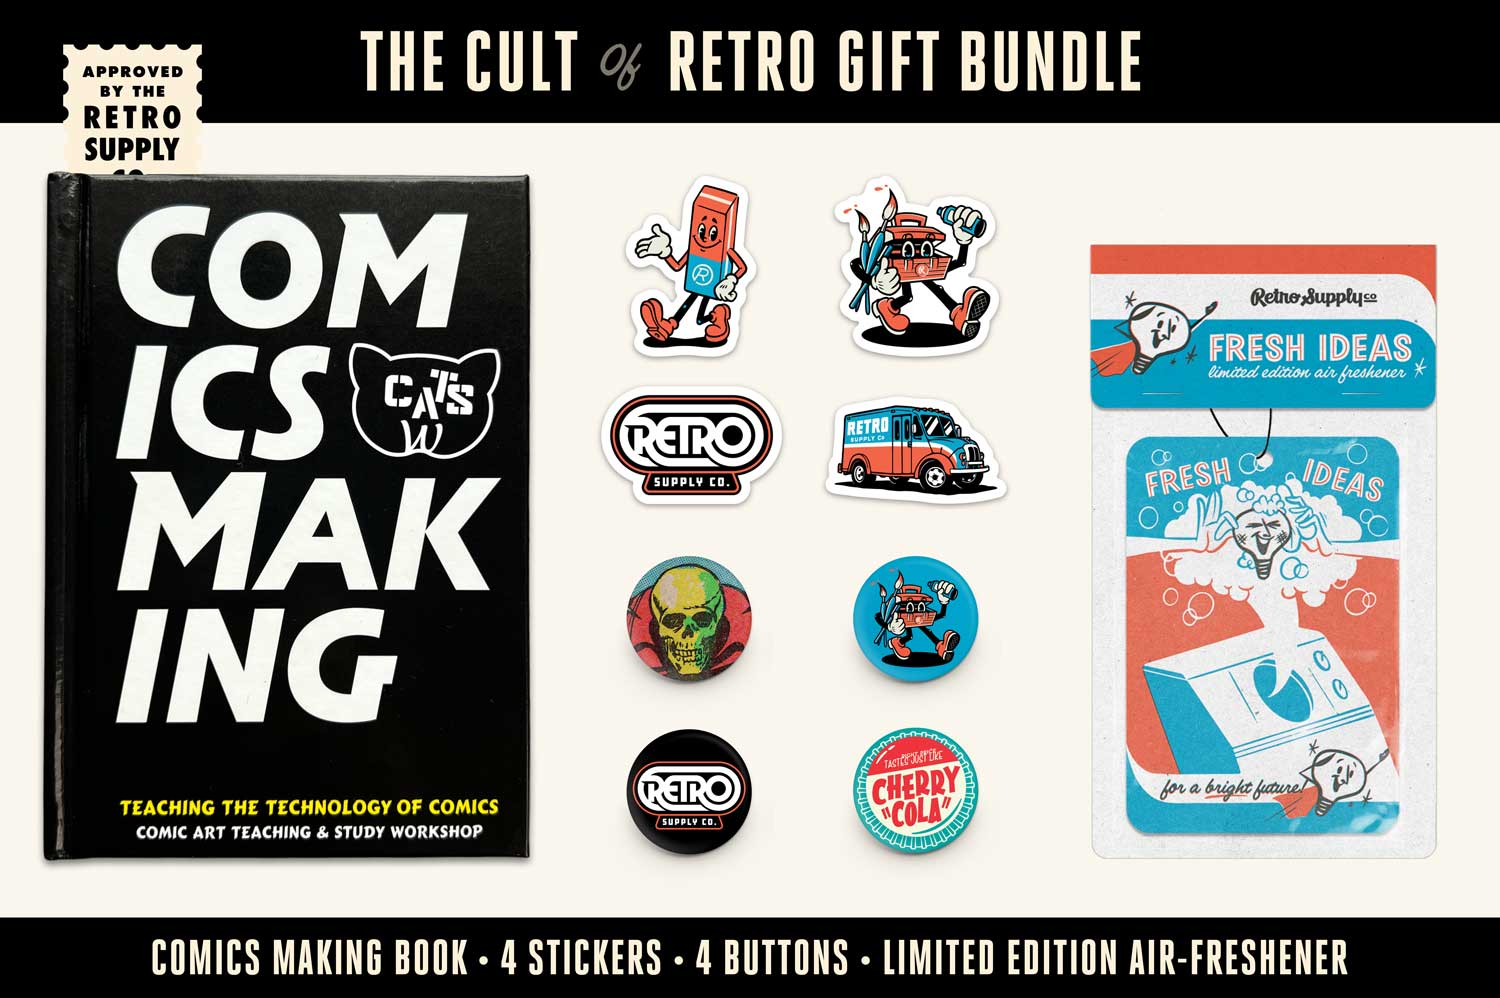 The Cult of Retro Gift Bundle